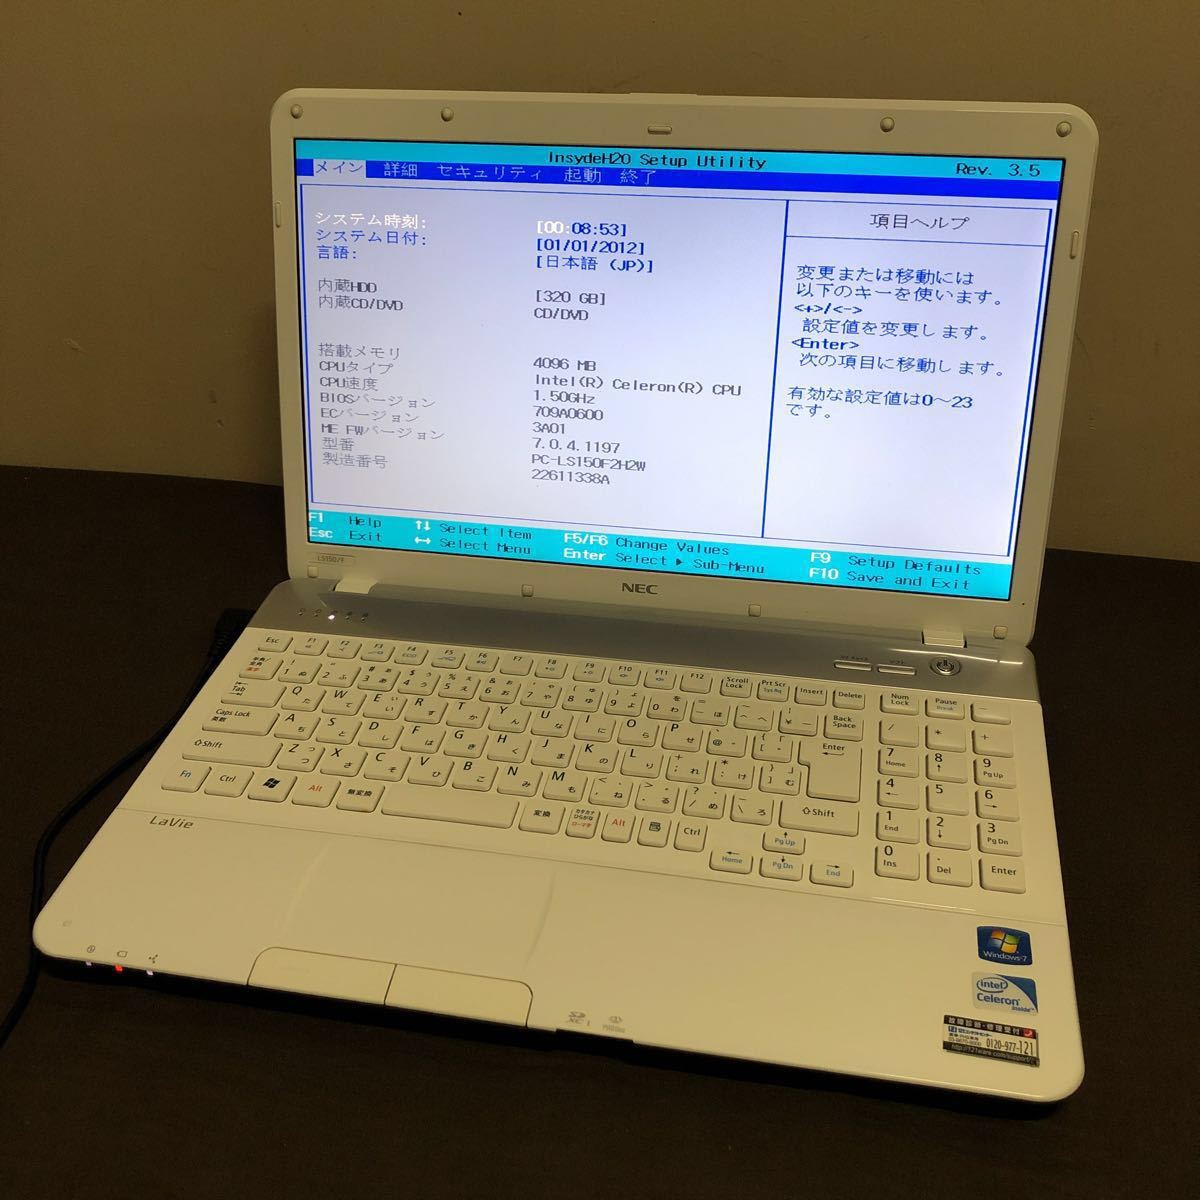 Nec Pc Ls150f2p2w Lavie Ls150 F Pearl White Intel Celeron B800 1 50ghz Ddr3 4gb Memory 3gb Hdd Installing Windows7 Note Pc Present Condition Goods Real Yahoo Auction Salling